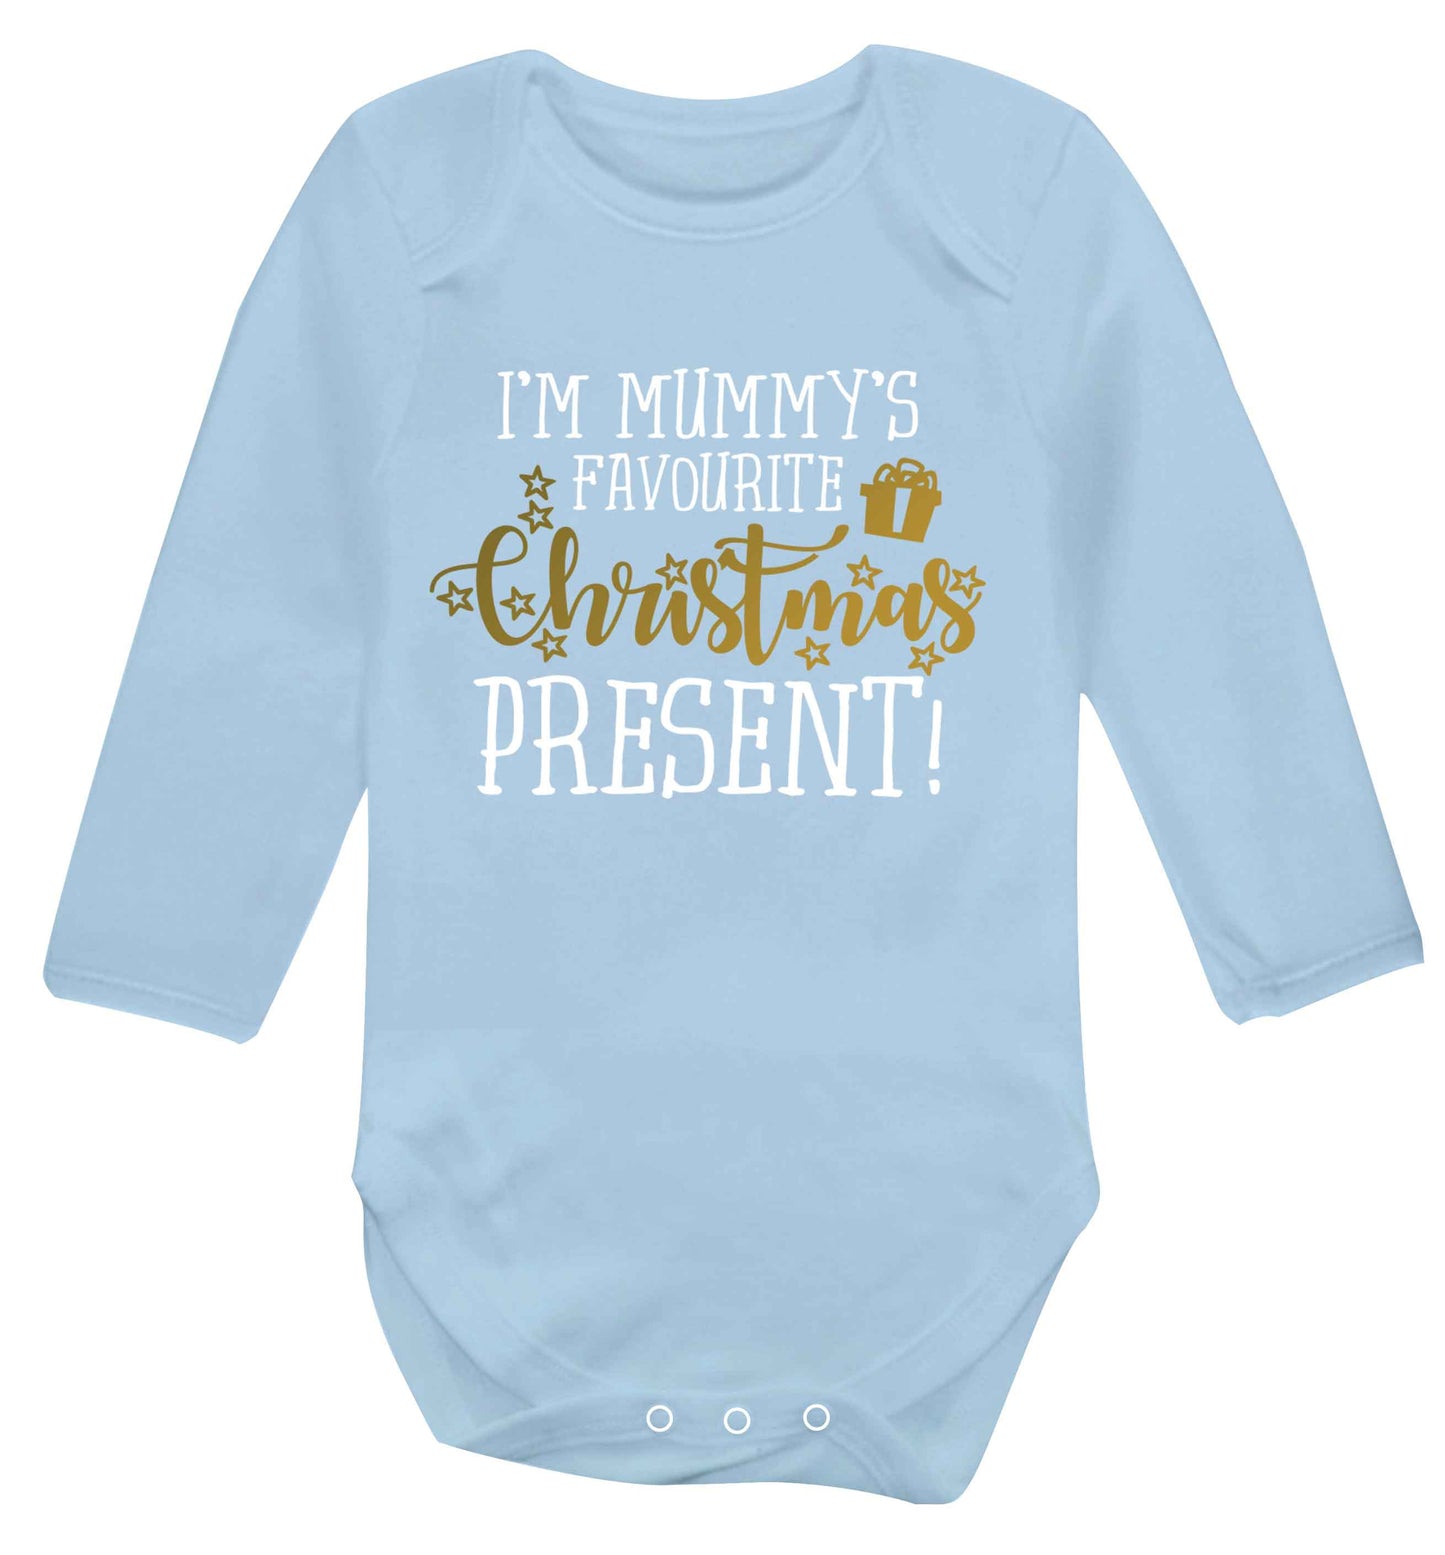 I'm Mummy's favourite Christmas present Baby Vest long sleeved pale blue 6-12 months